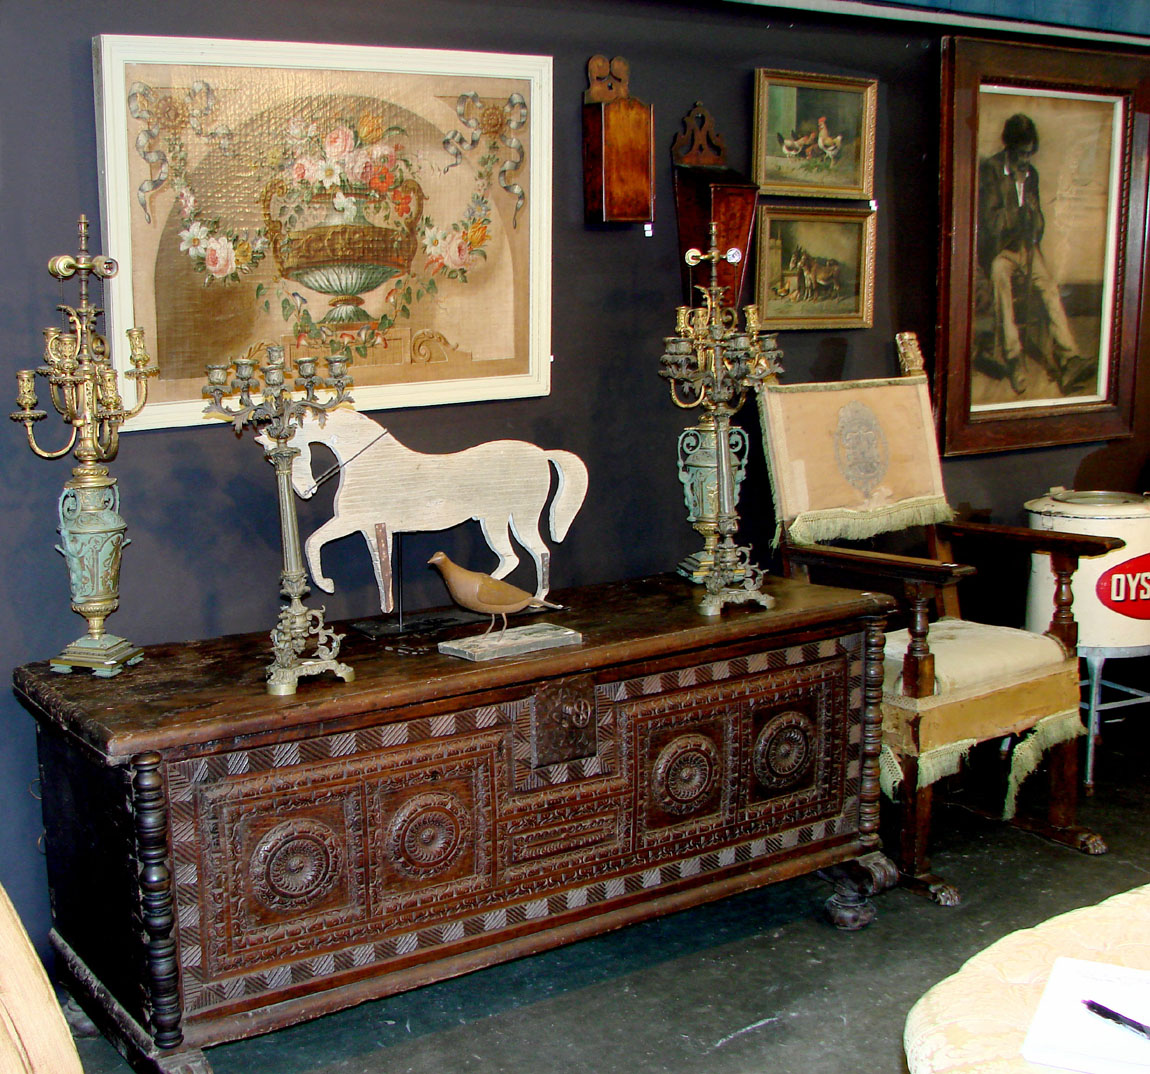 Holliston, Mass., dealer Mario Pollo always brings an eclectic selection of merchandise. The large heavily carved walnut chest, circa 1700–50, was priced at $ 2,350. Sold tags appeared in his booth just a few minutes after opening.